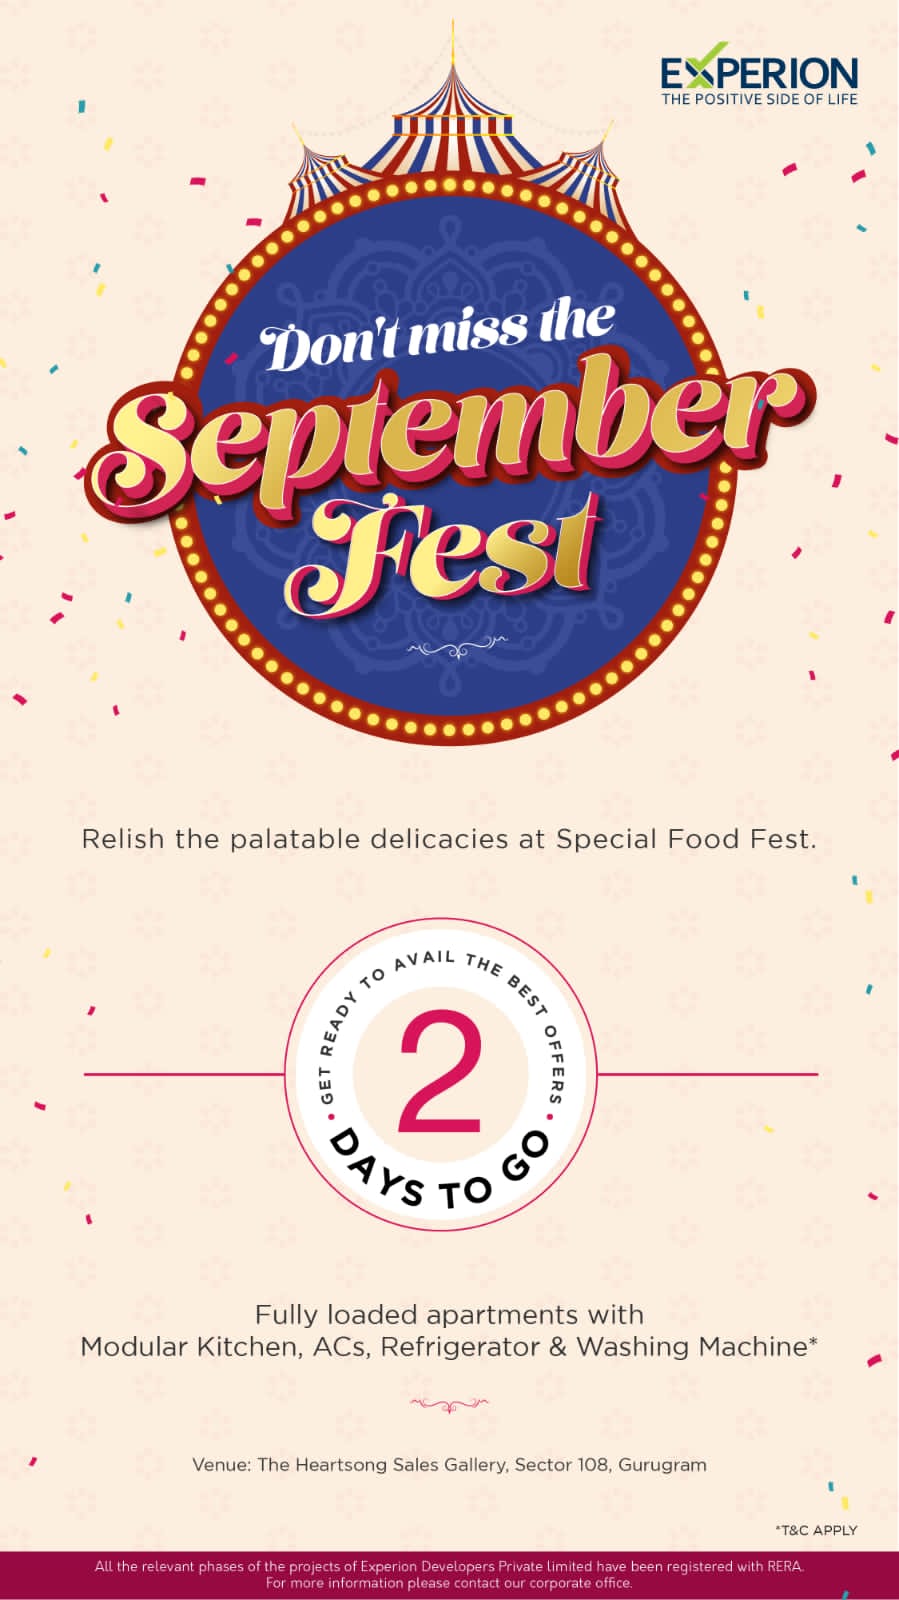 Don't miss the September fest at Experion Developers, Gurgaon Update